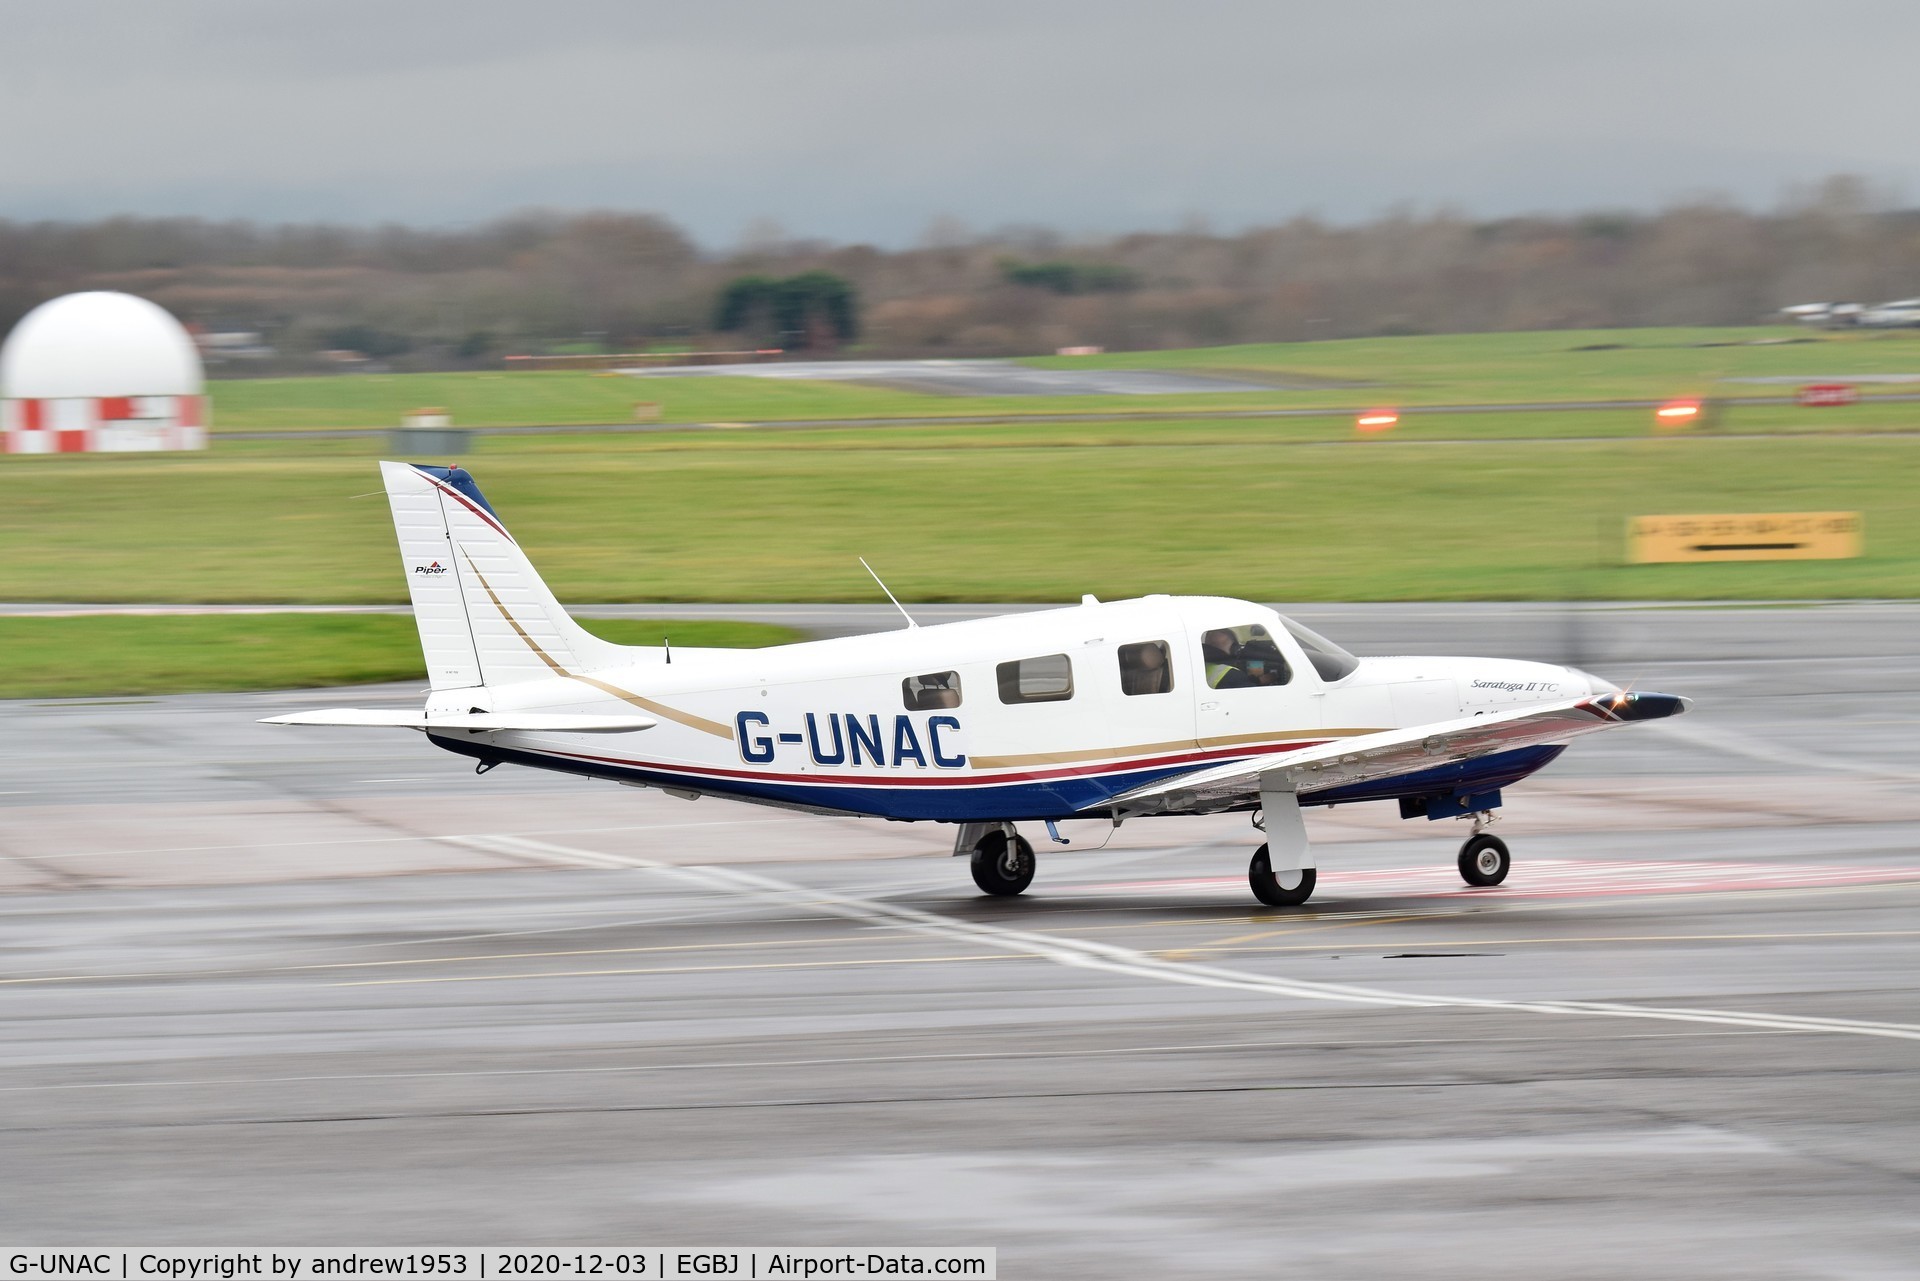 G-UNAC, 2006 Piper PA-32R-301T II TC Turbo Saratoga C/N 3257422, G-UNAC at Gloucestershire Airport.